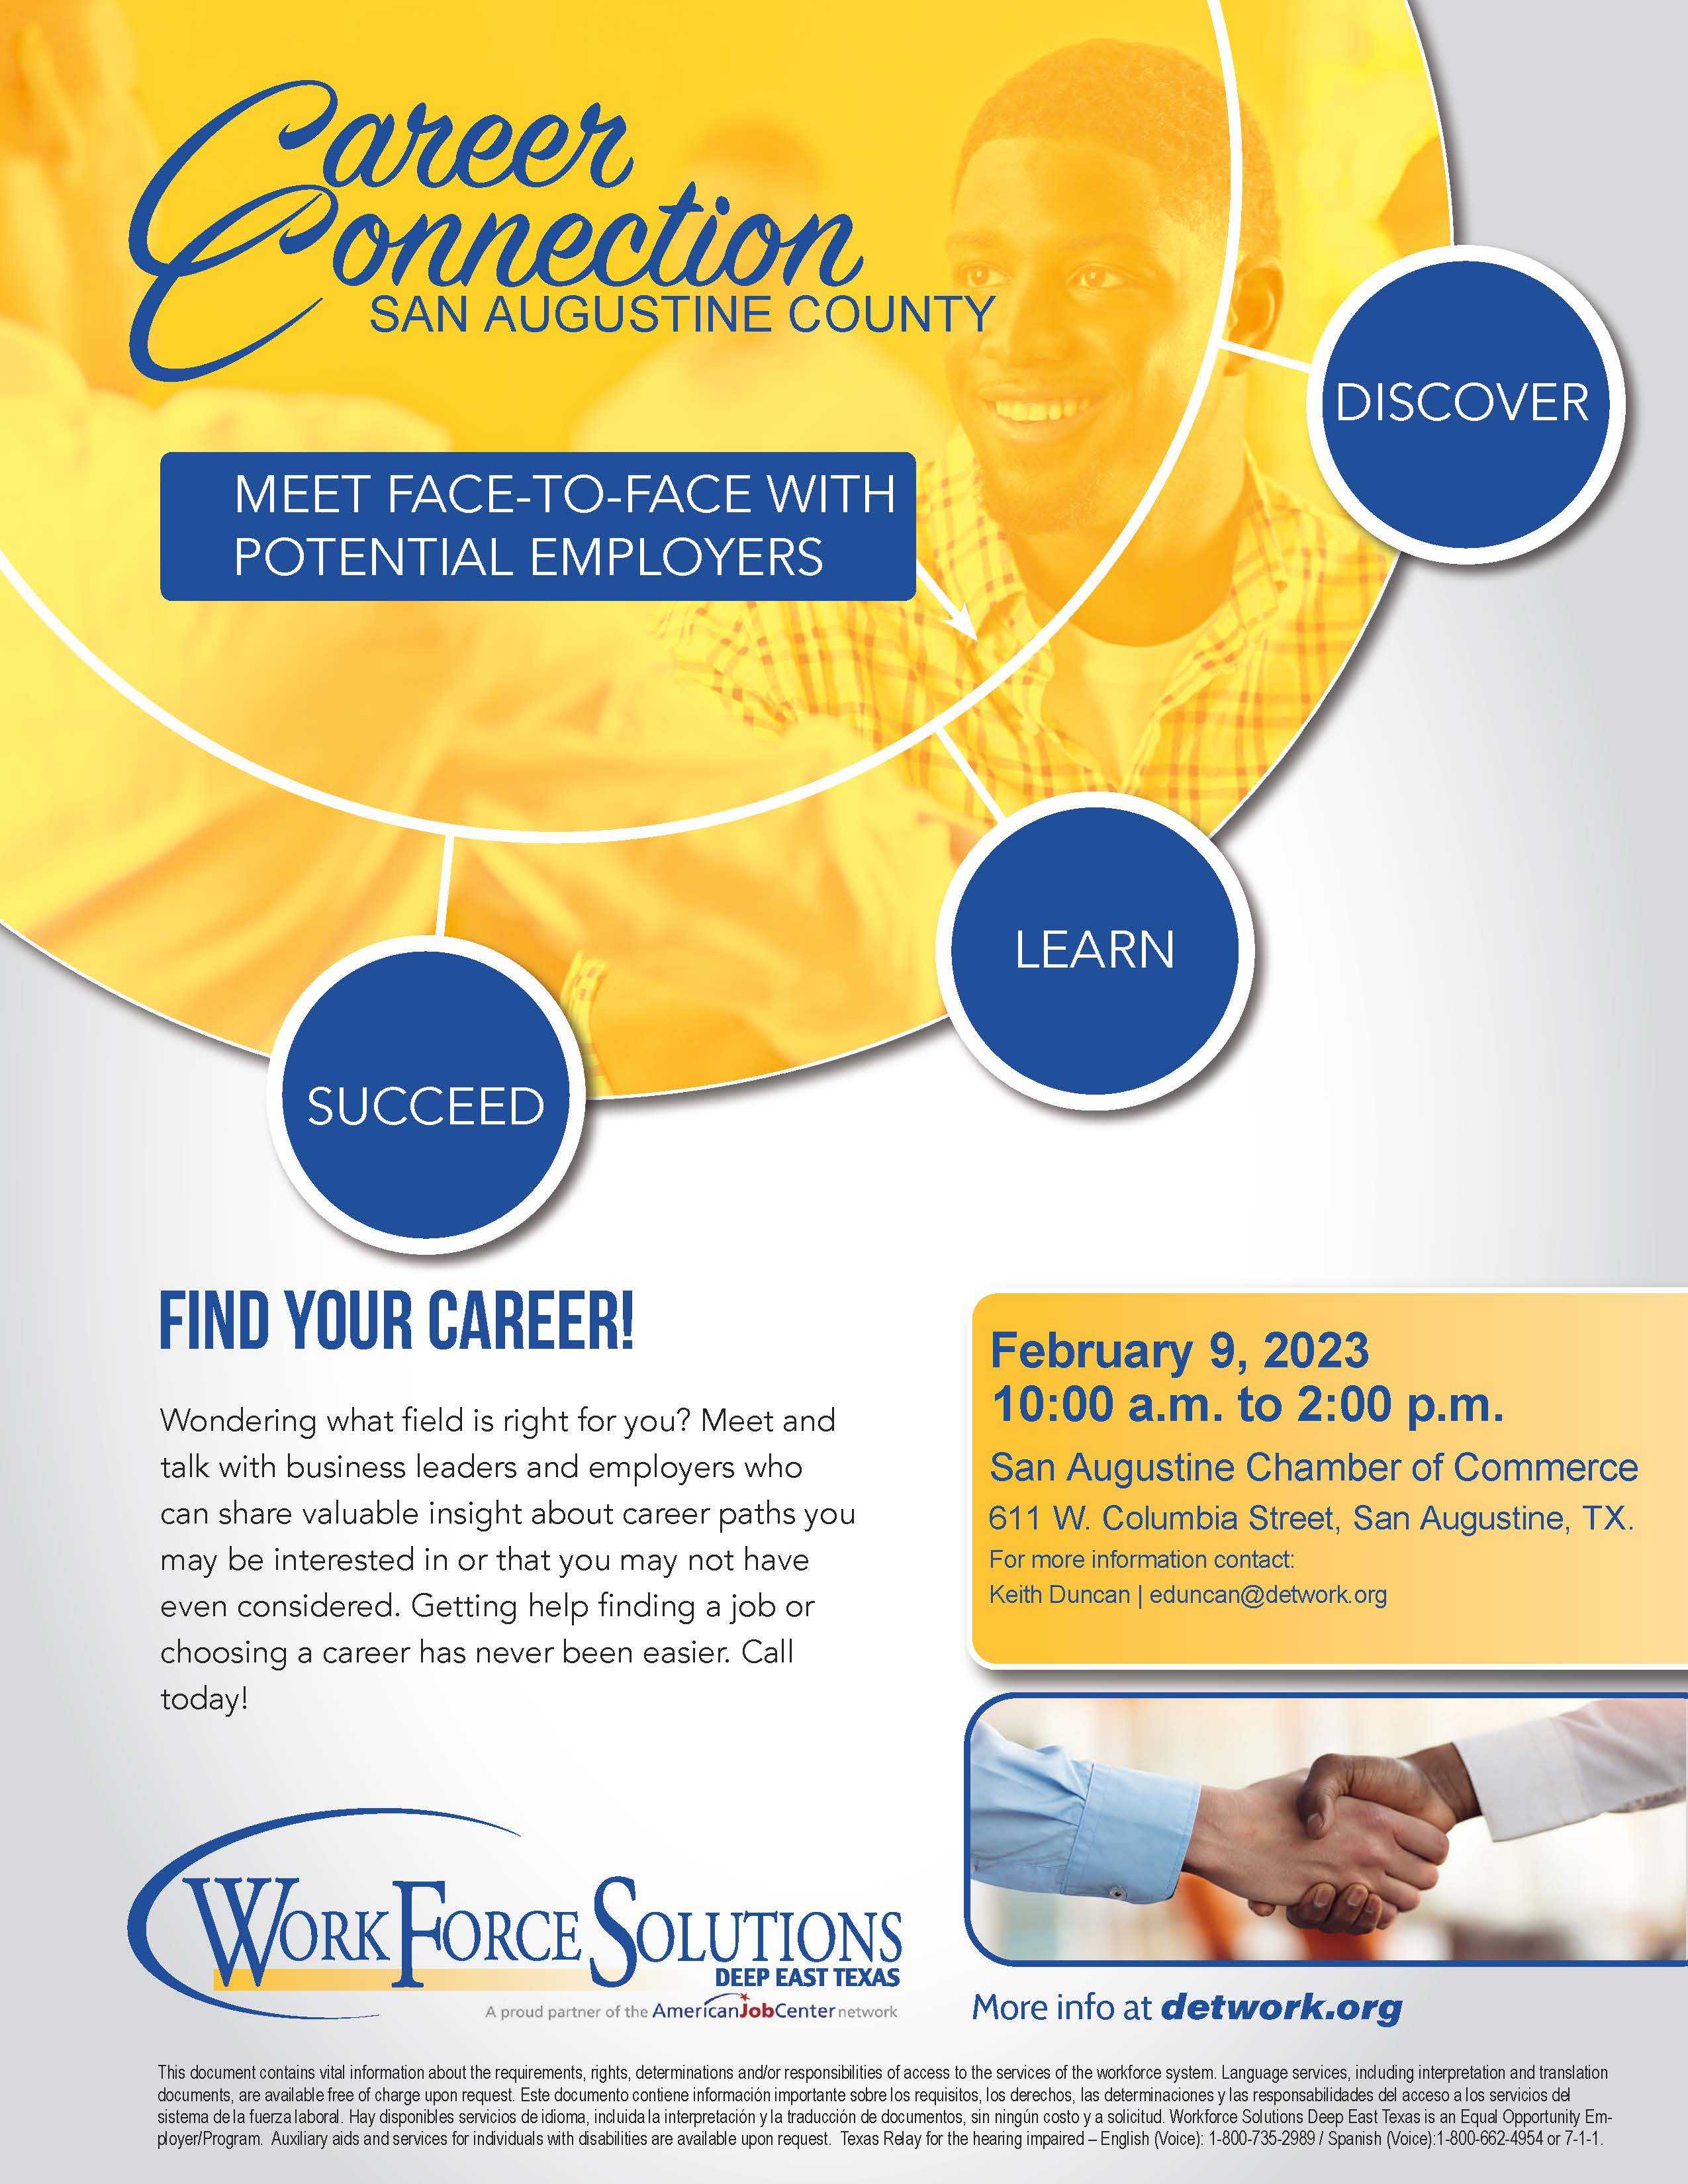 Career Connection in San Augustine County